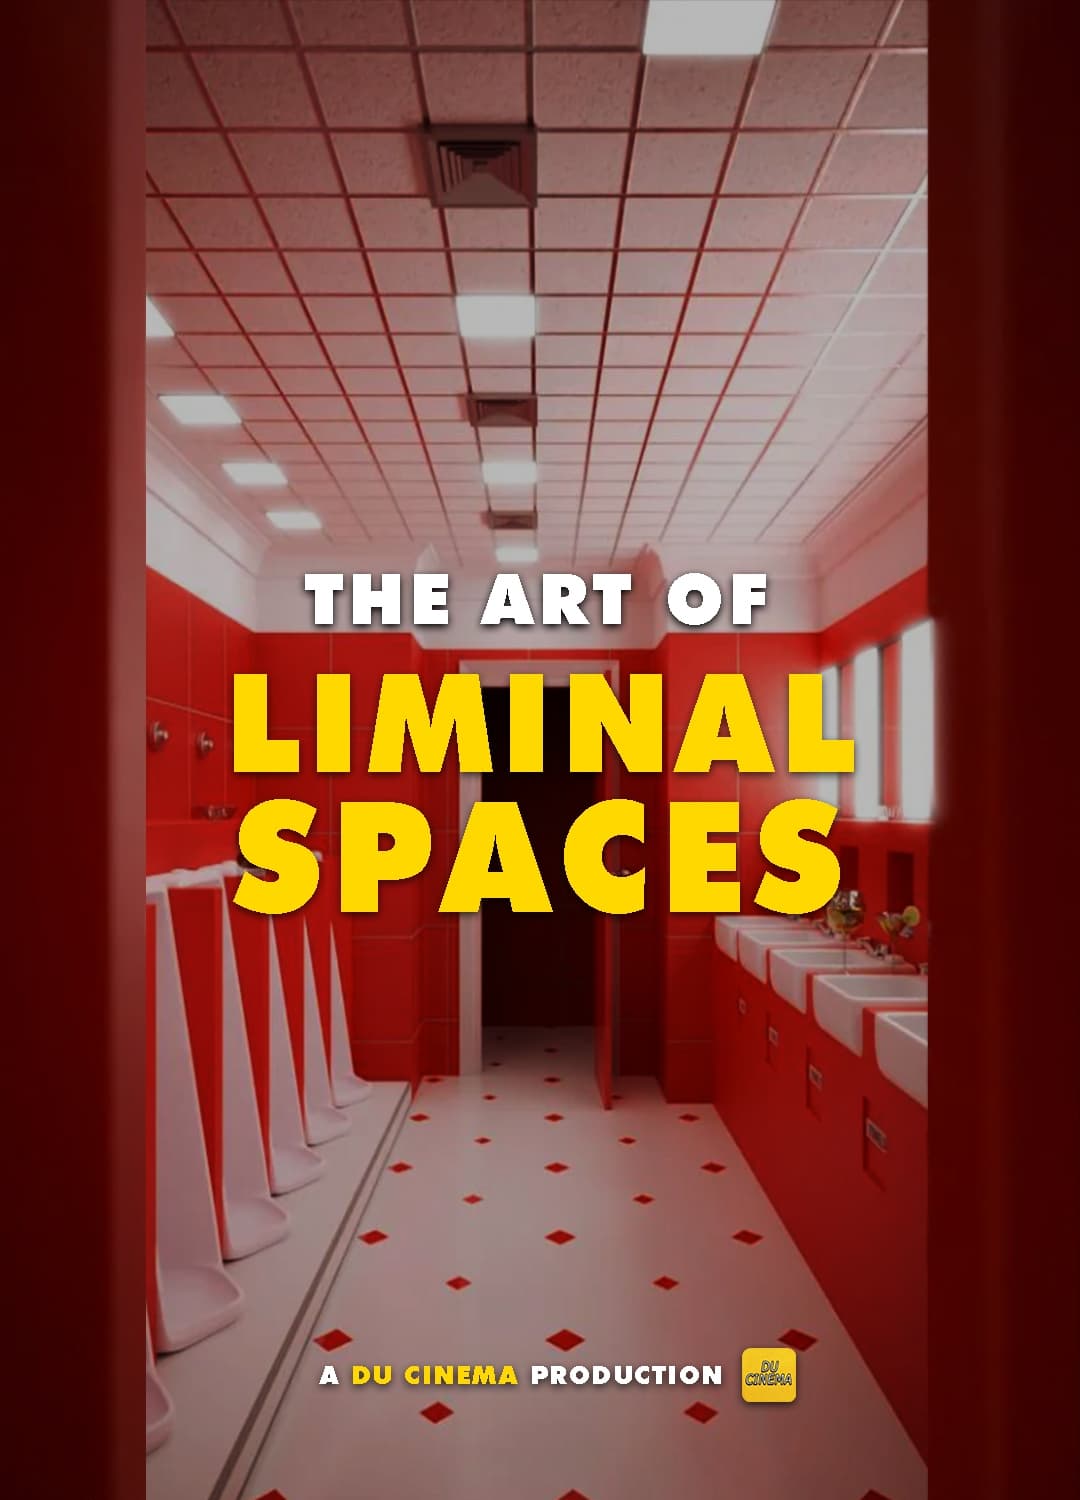 The Art of Liminal Spaces